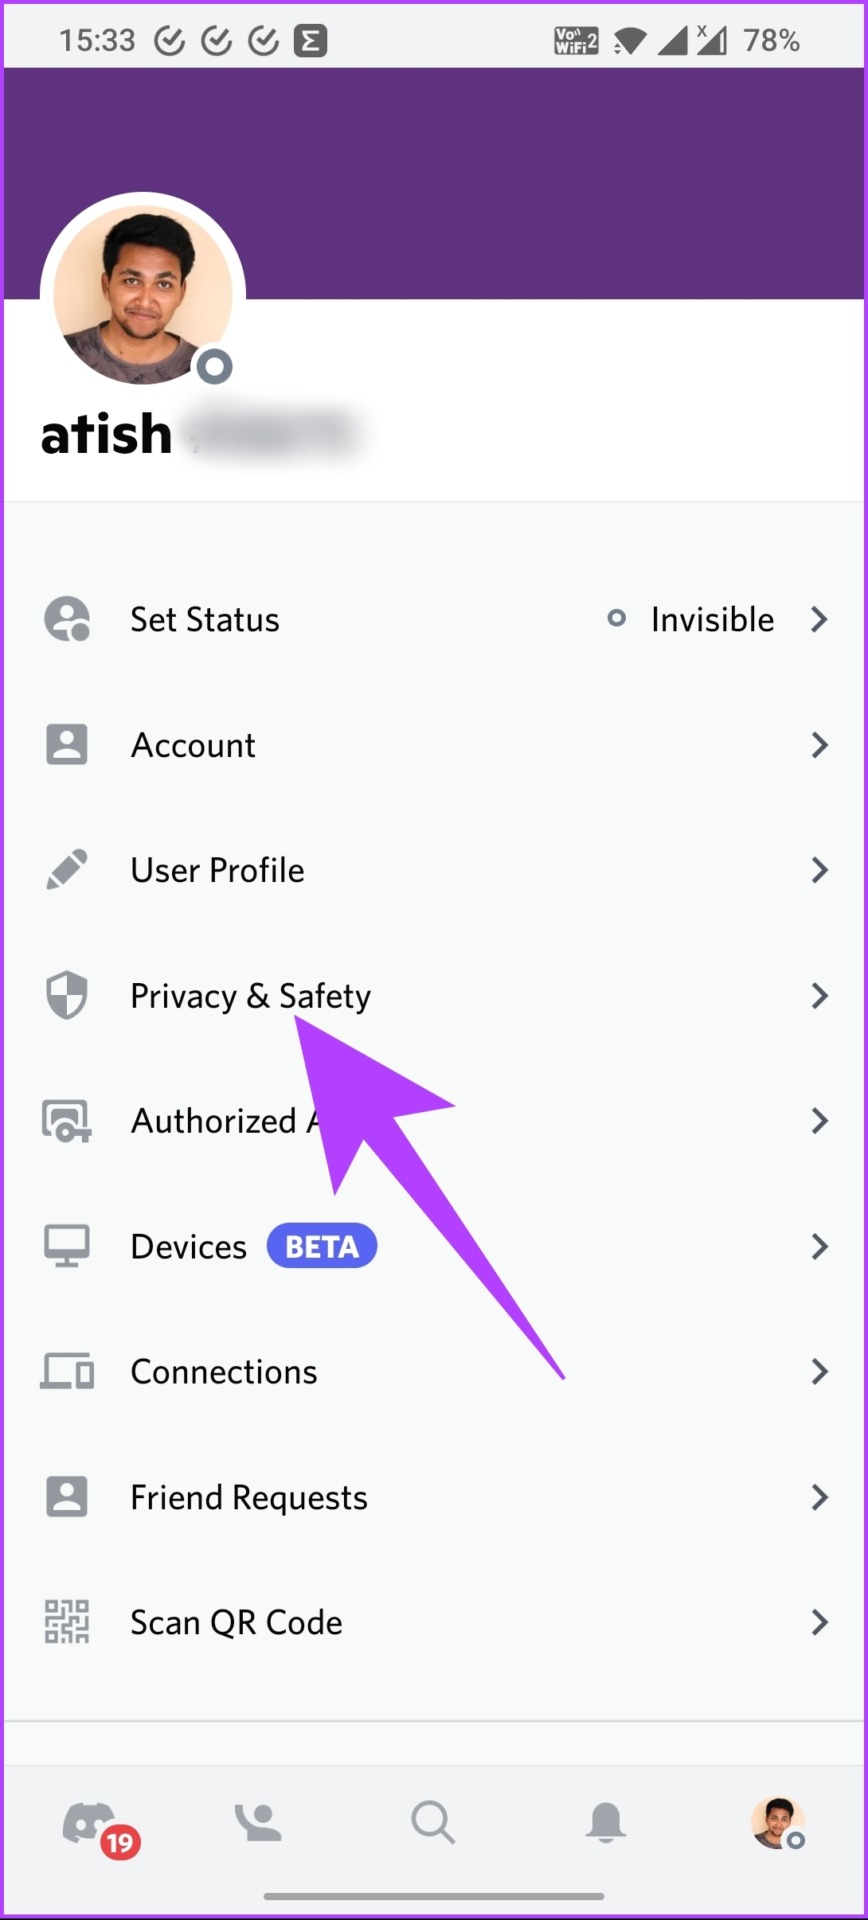 Click on the Privacy & Safety option